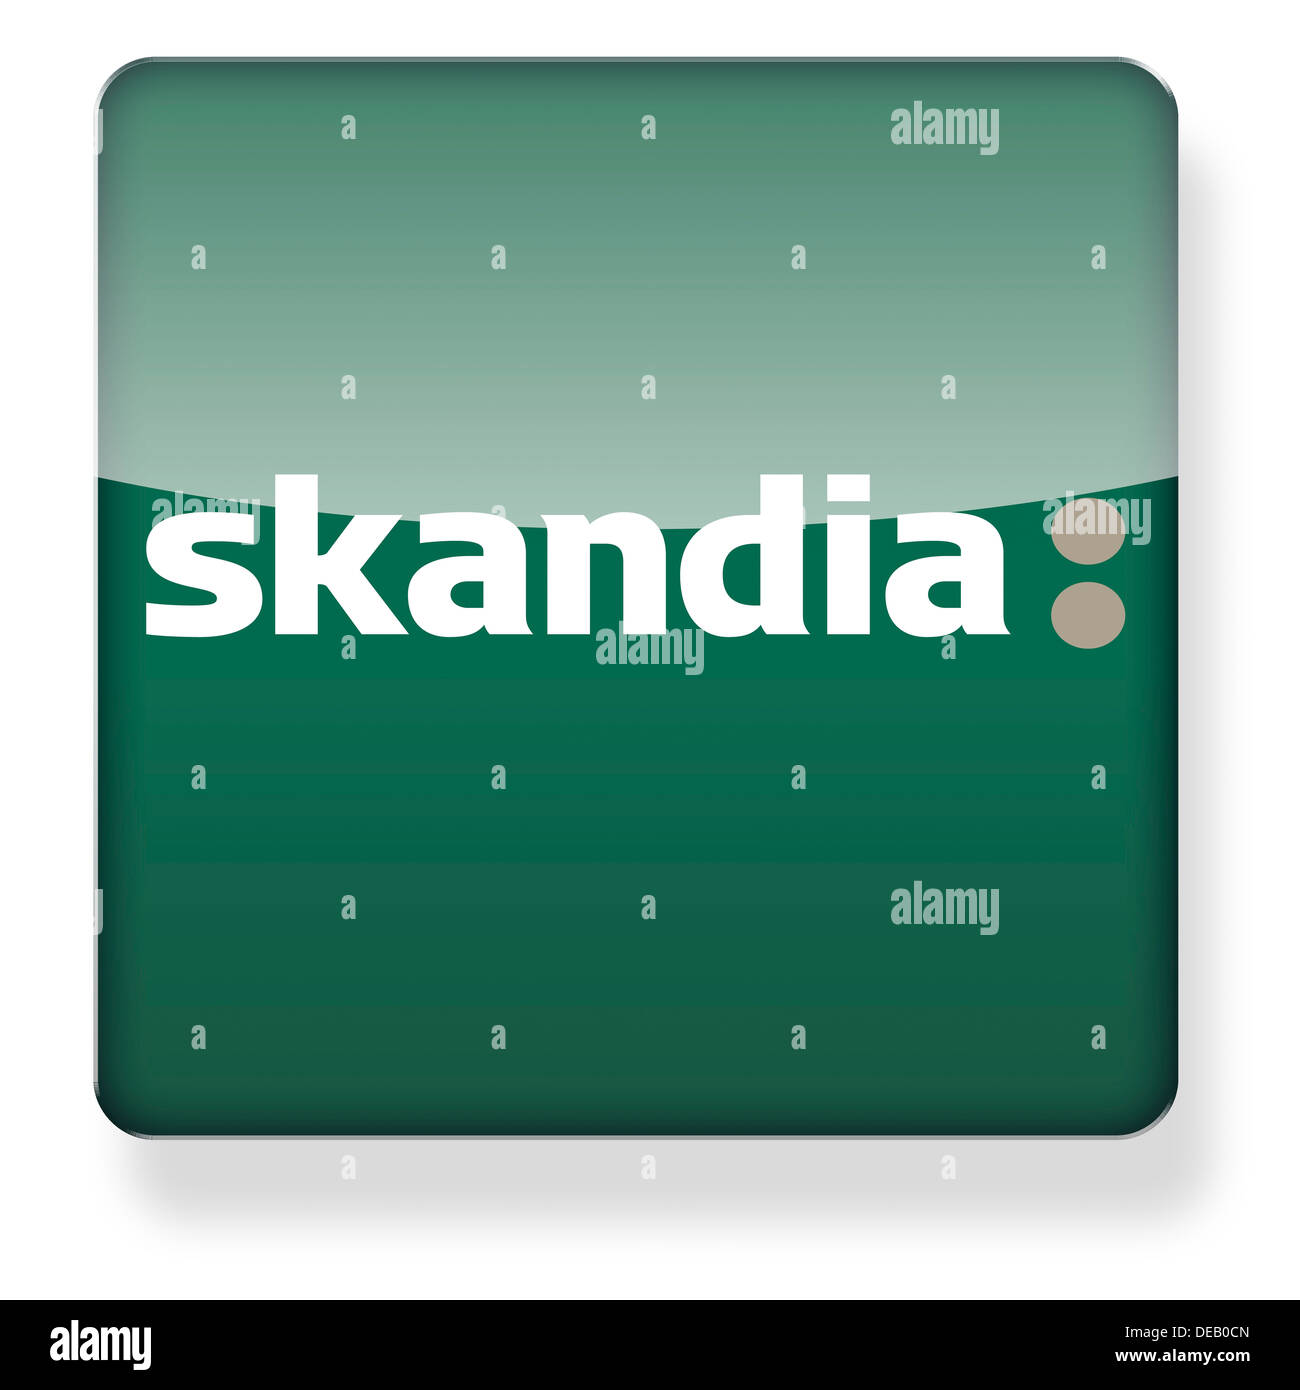 Skandia logo as an app icon. Clipping path included. Stock Photo